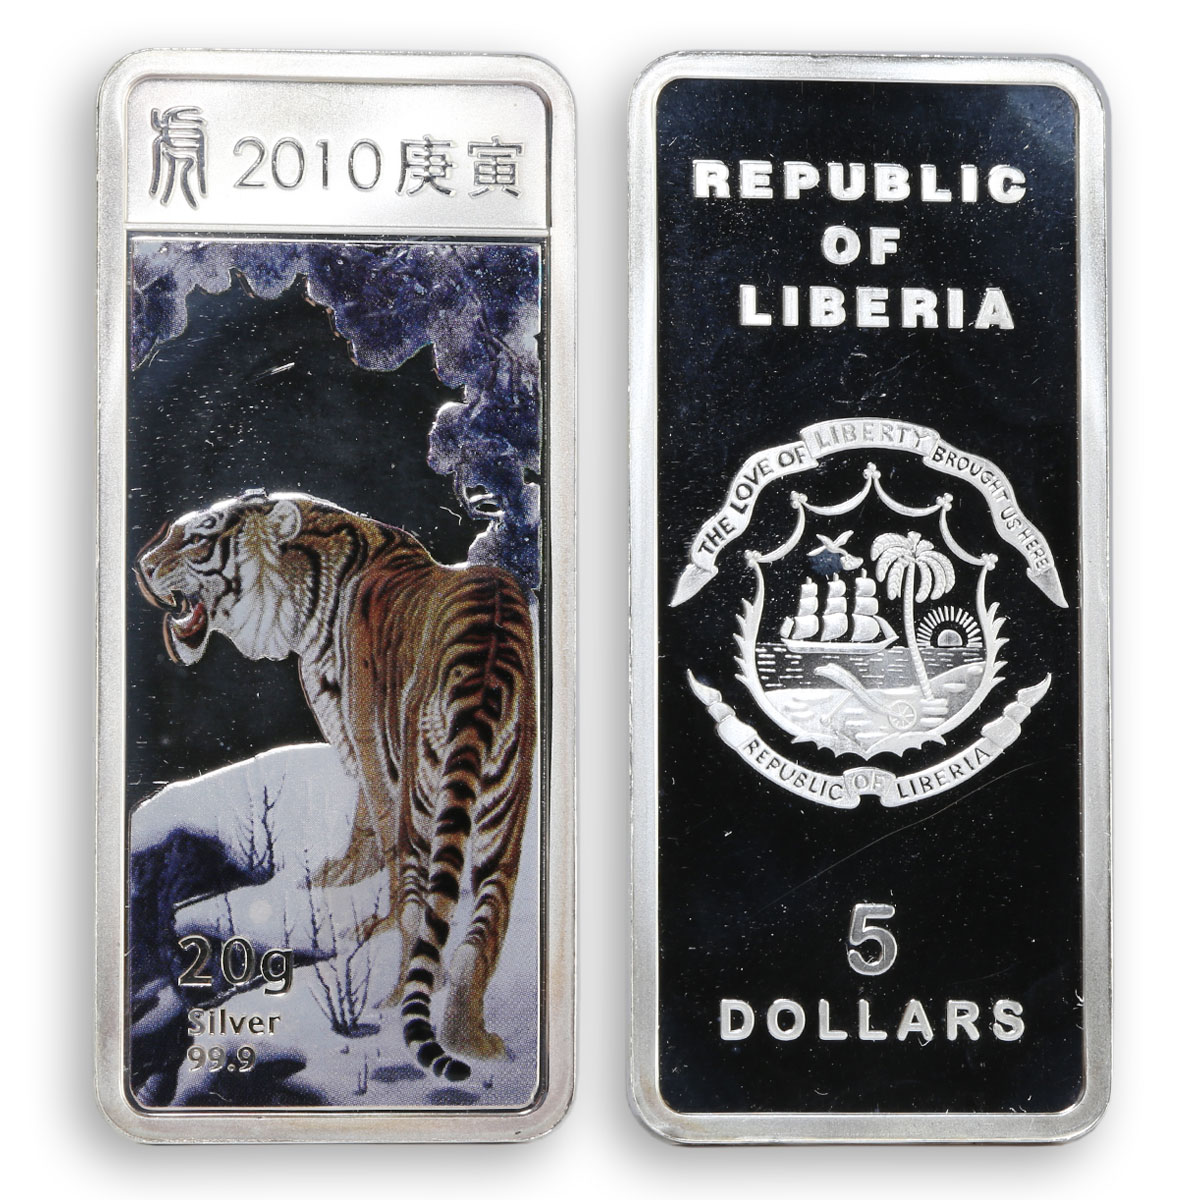 Liberia set of 4 coins Year of the Tiger colored proof silver coin 2010